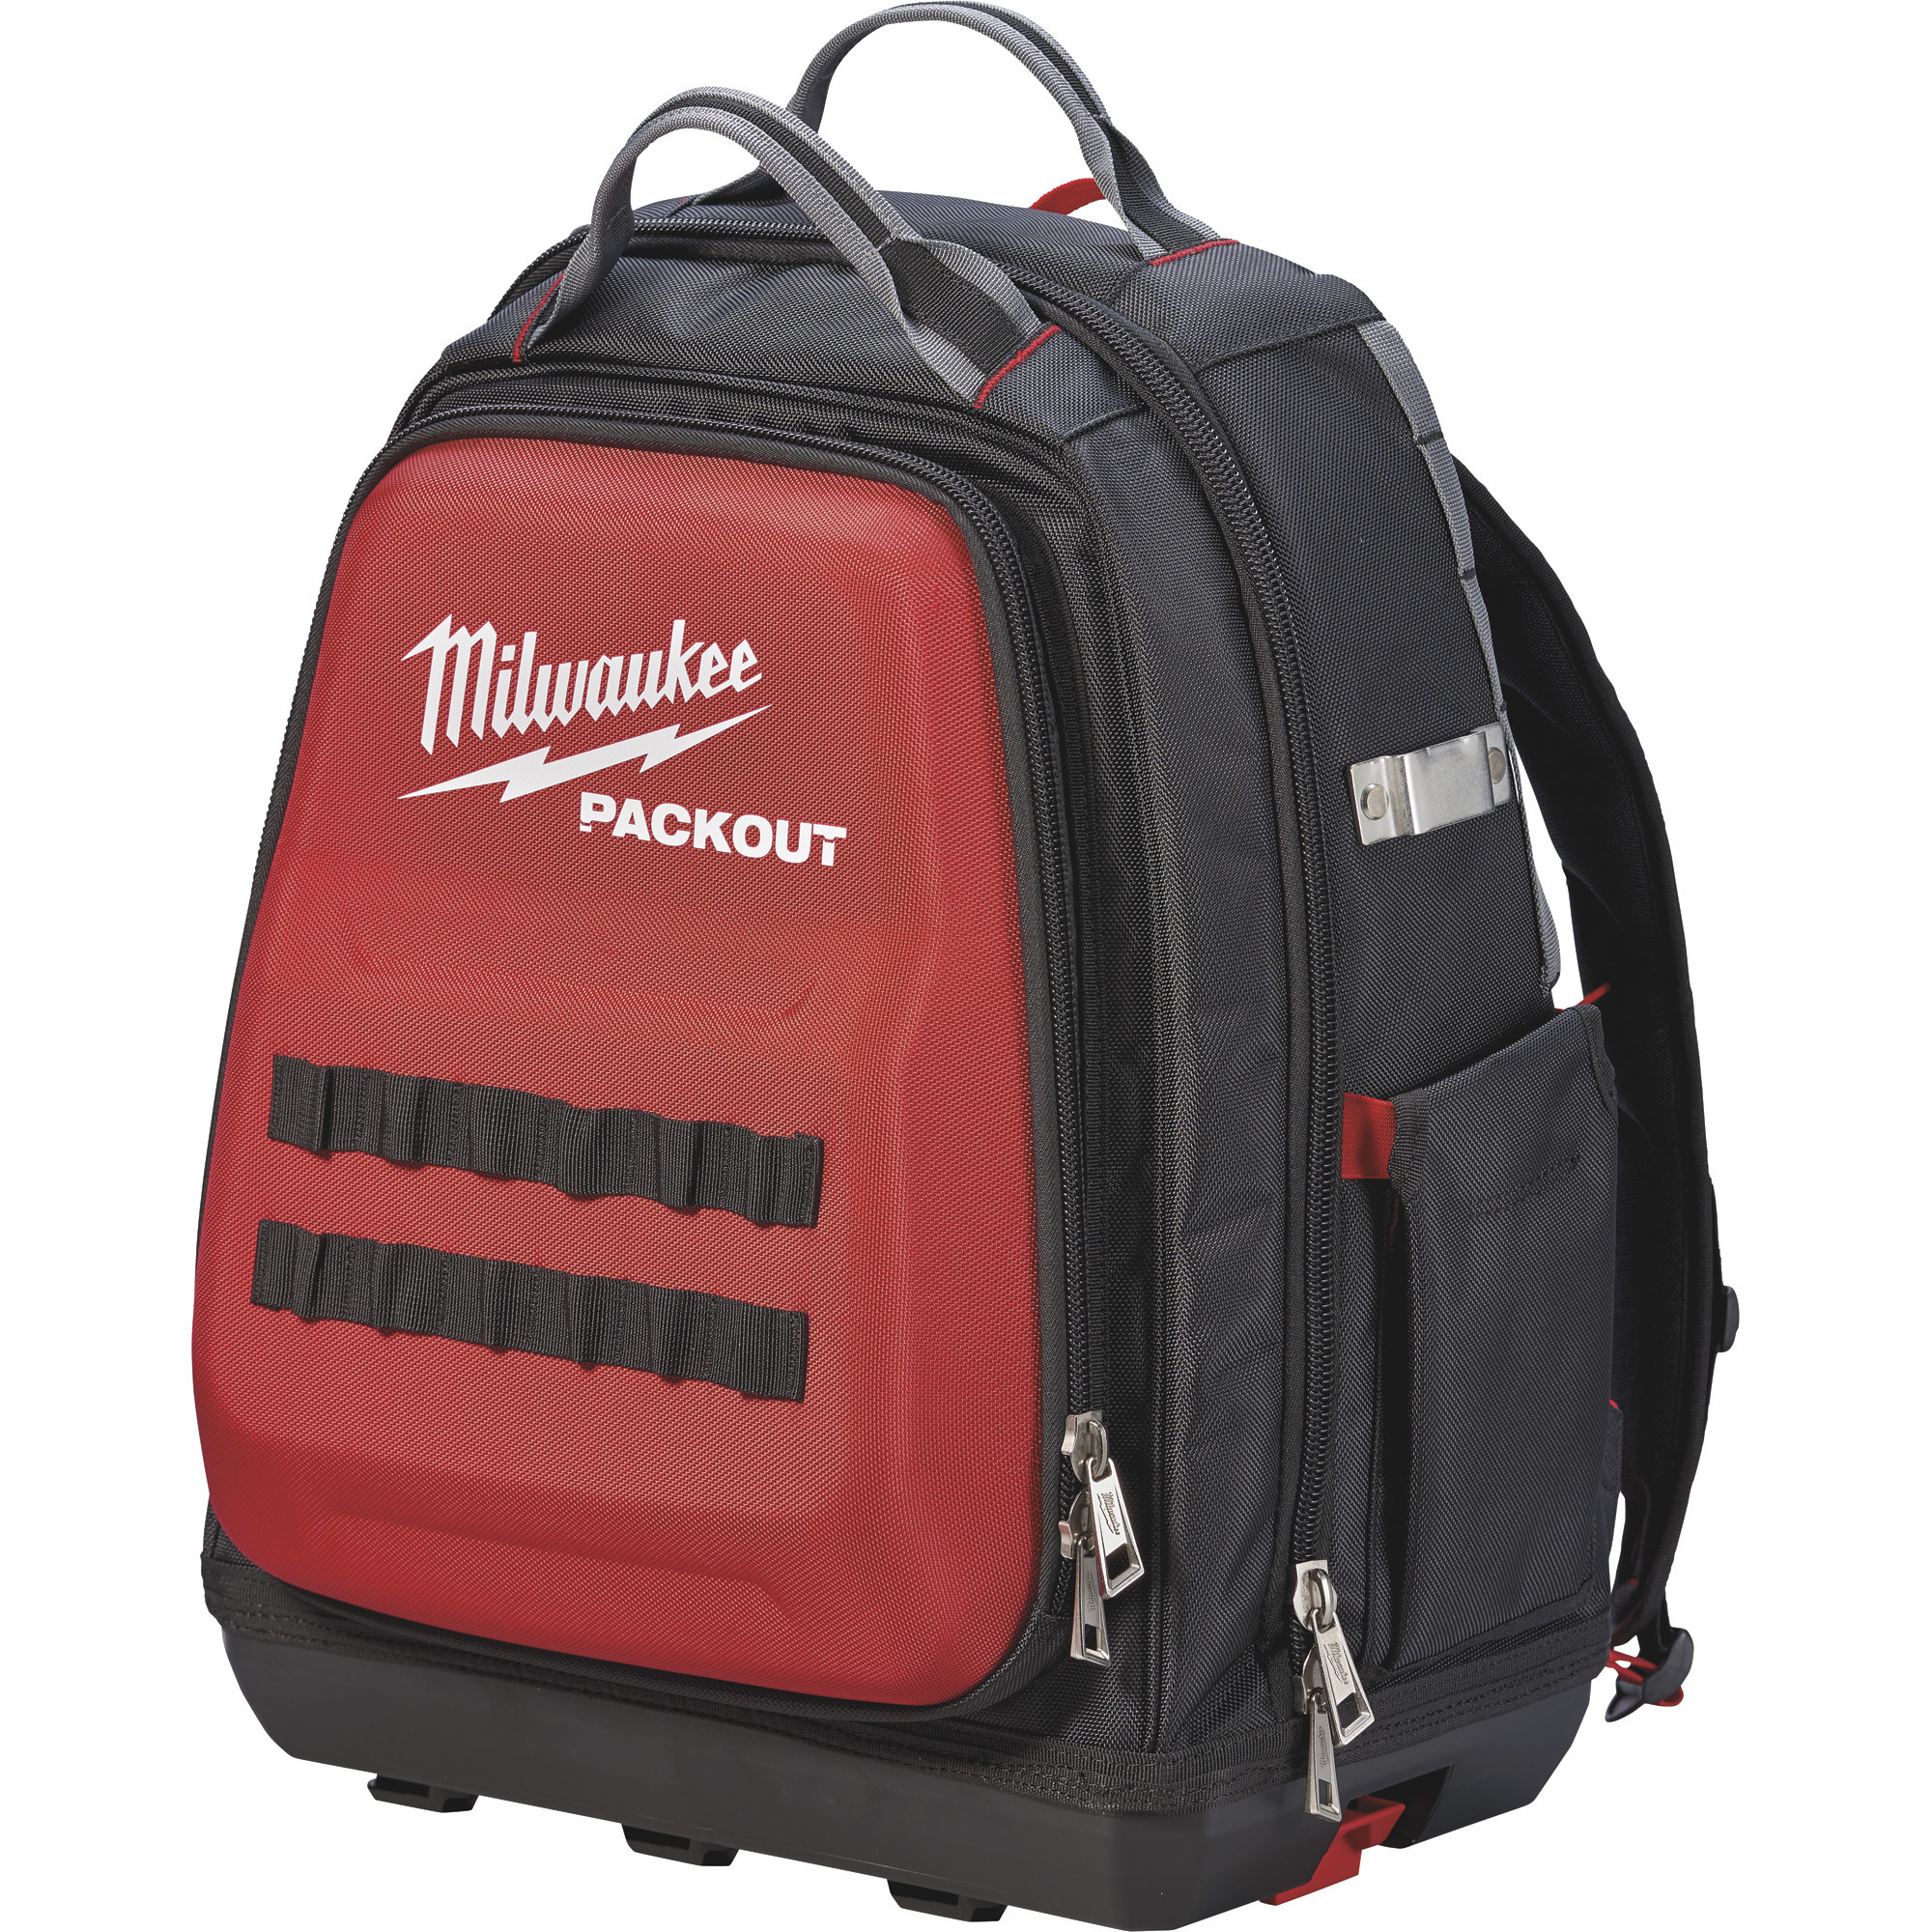 Milwaukee Packout Backpack, 15 3/4Inch L x 11 13/16Inch W x 15 3/4Inch H, Model 48-22-8301